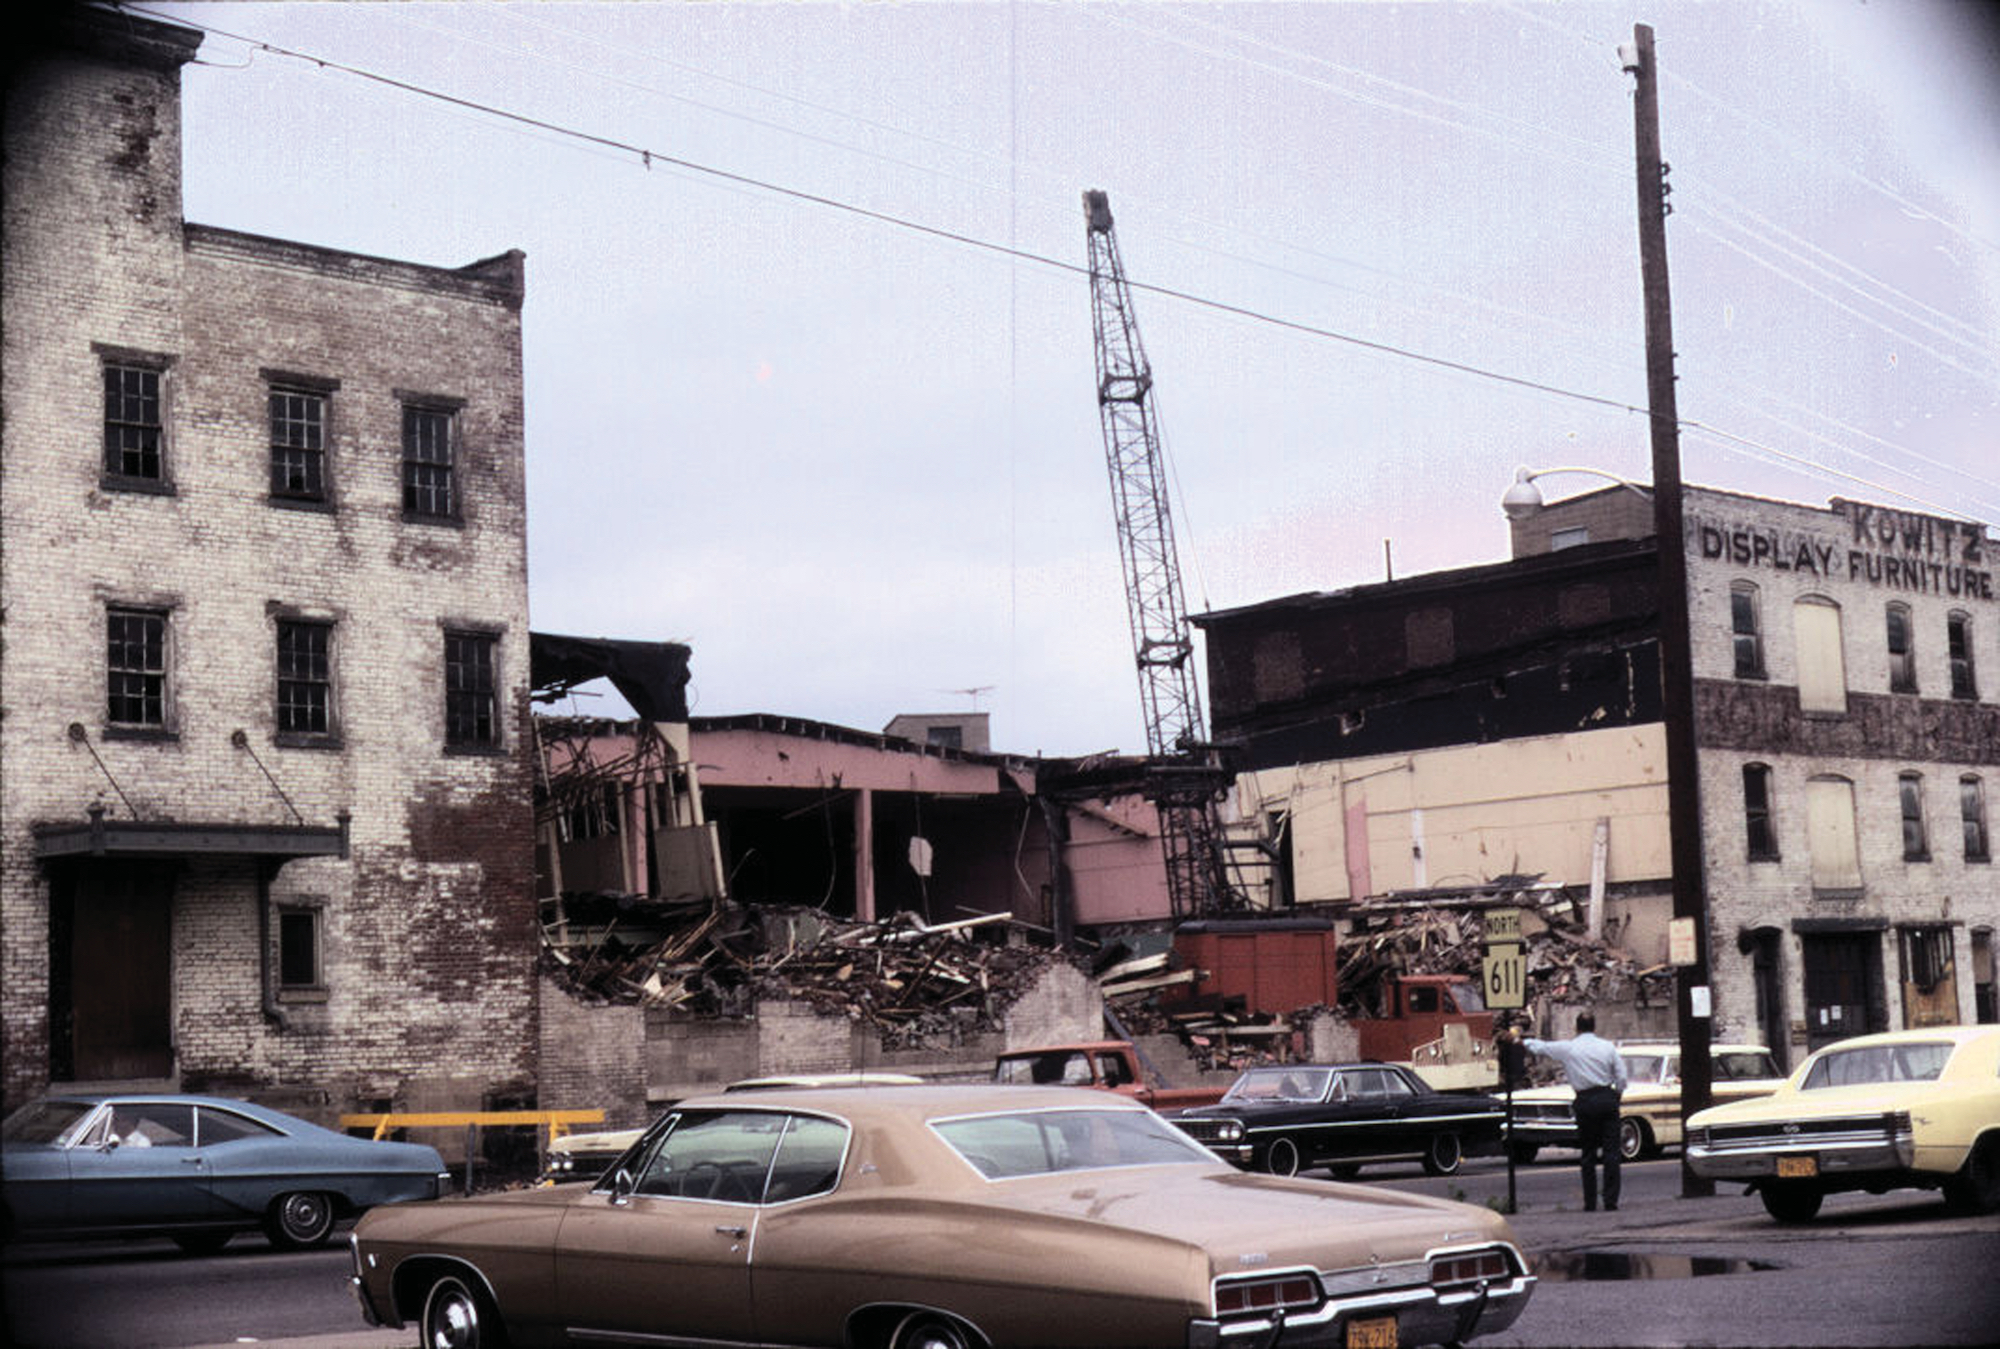 A 1970s photograph of an old brick building on a city block under demolition with a man standing by a street sign and cars passing by.